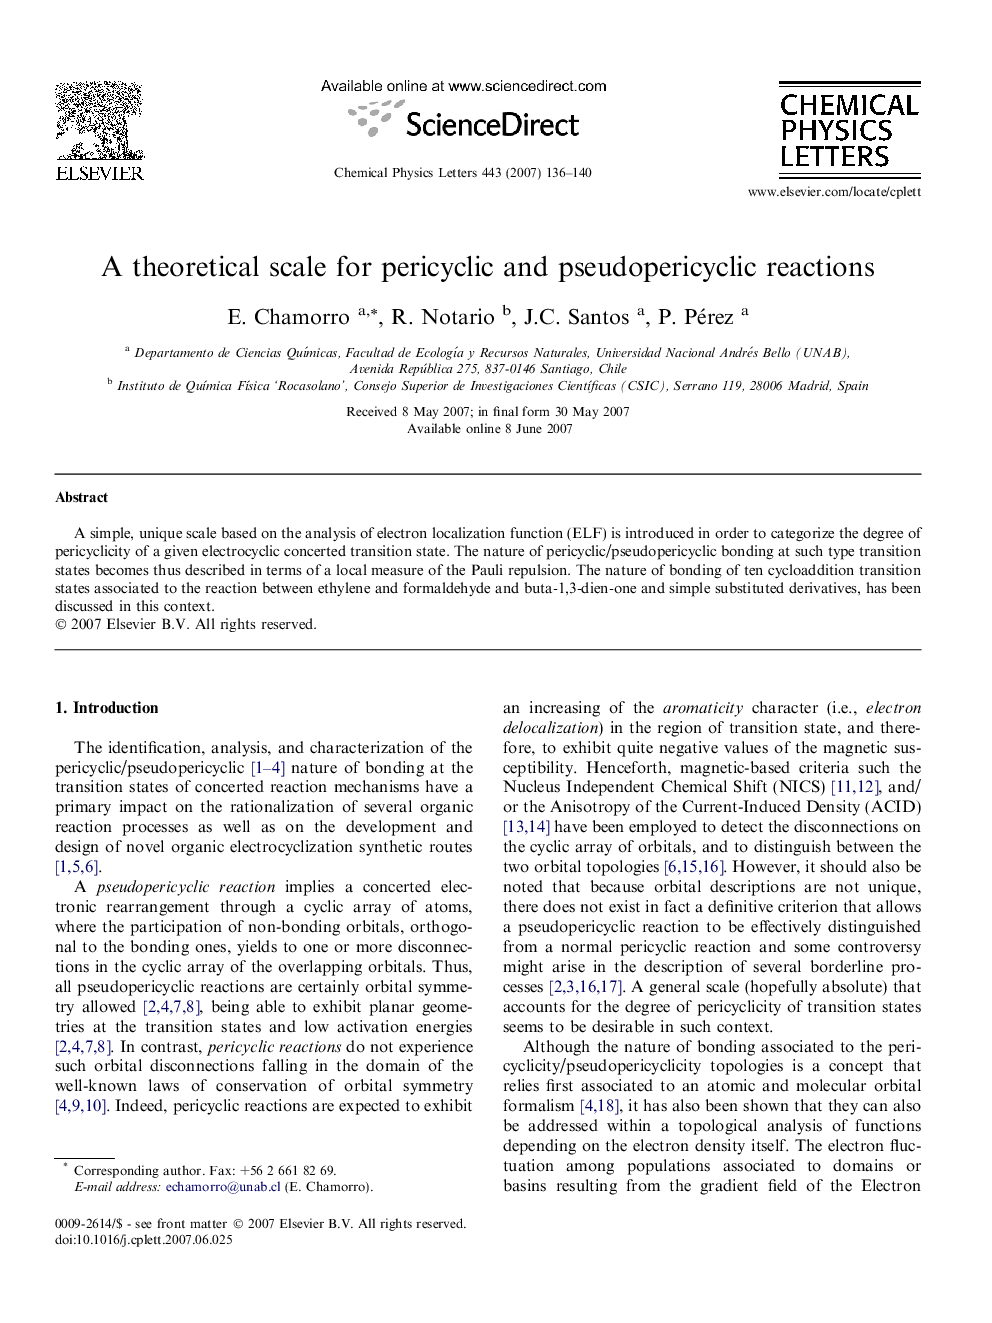 A theoretical scale for pericyclic and pseudopericyclic reactions